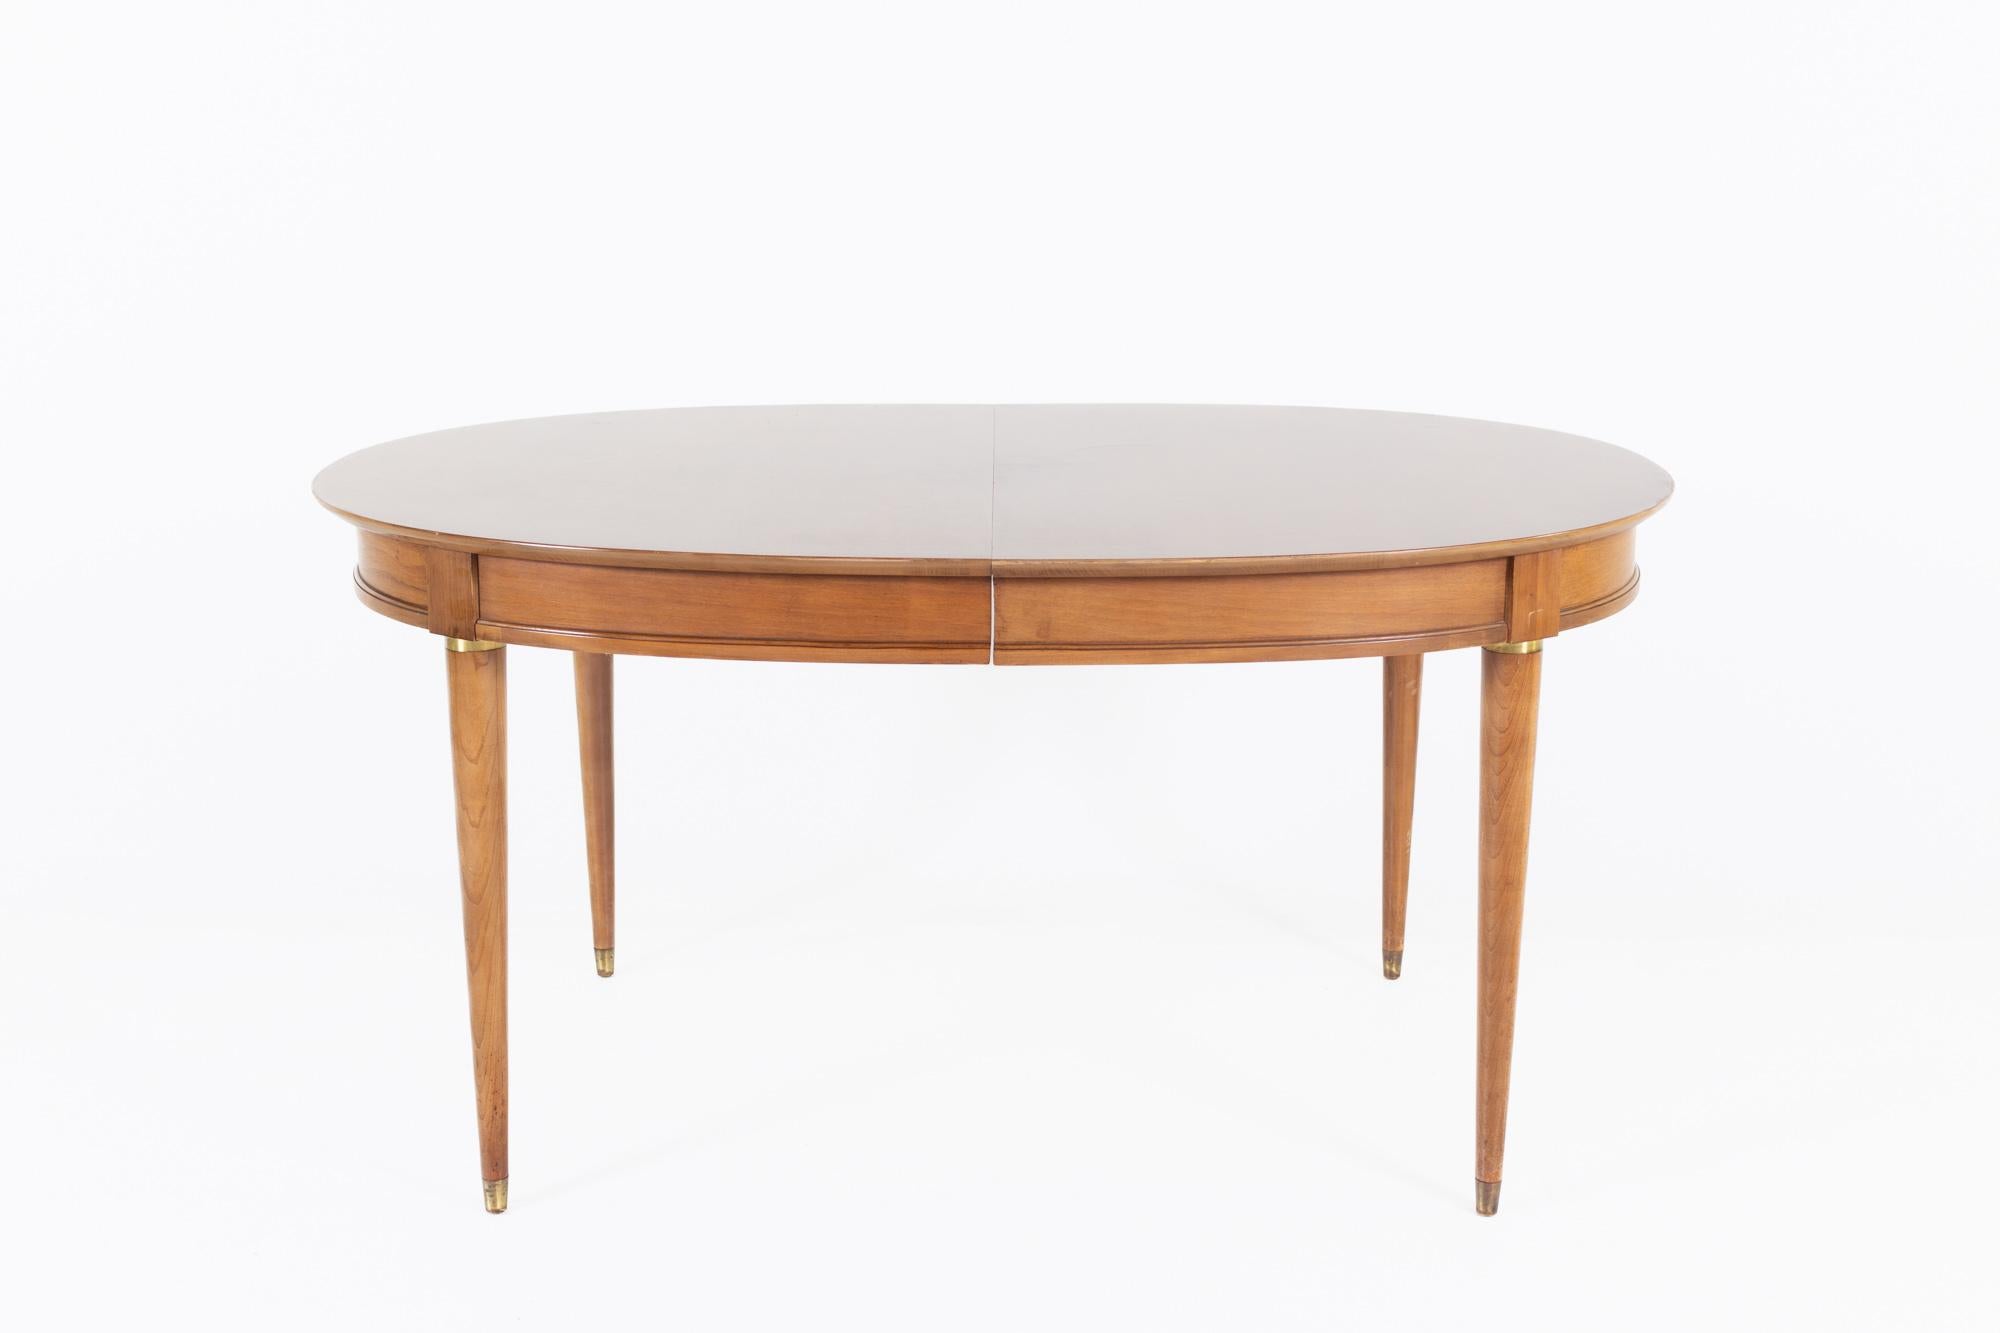 Lane First Edition Cherry and brass expanding dining table with 3 leaves

This table measures: 58 wide x 40 deep x 28.5 high, with a chair clearance of 24 inches, each leaf measures 12 inches wide, making a maximum table width of 94 inches when